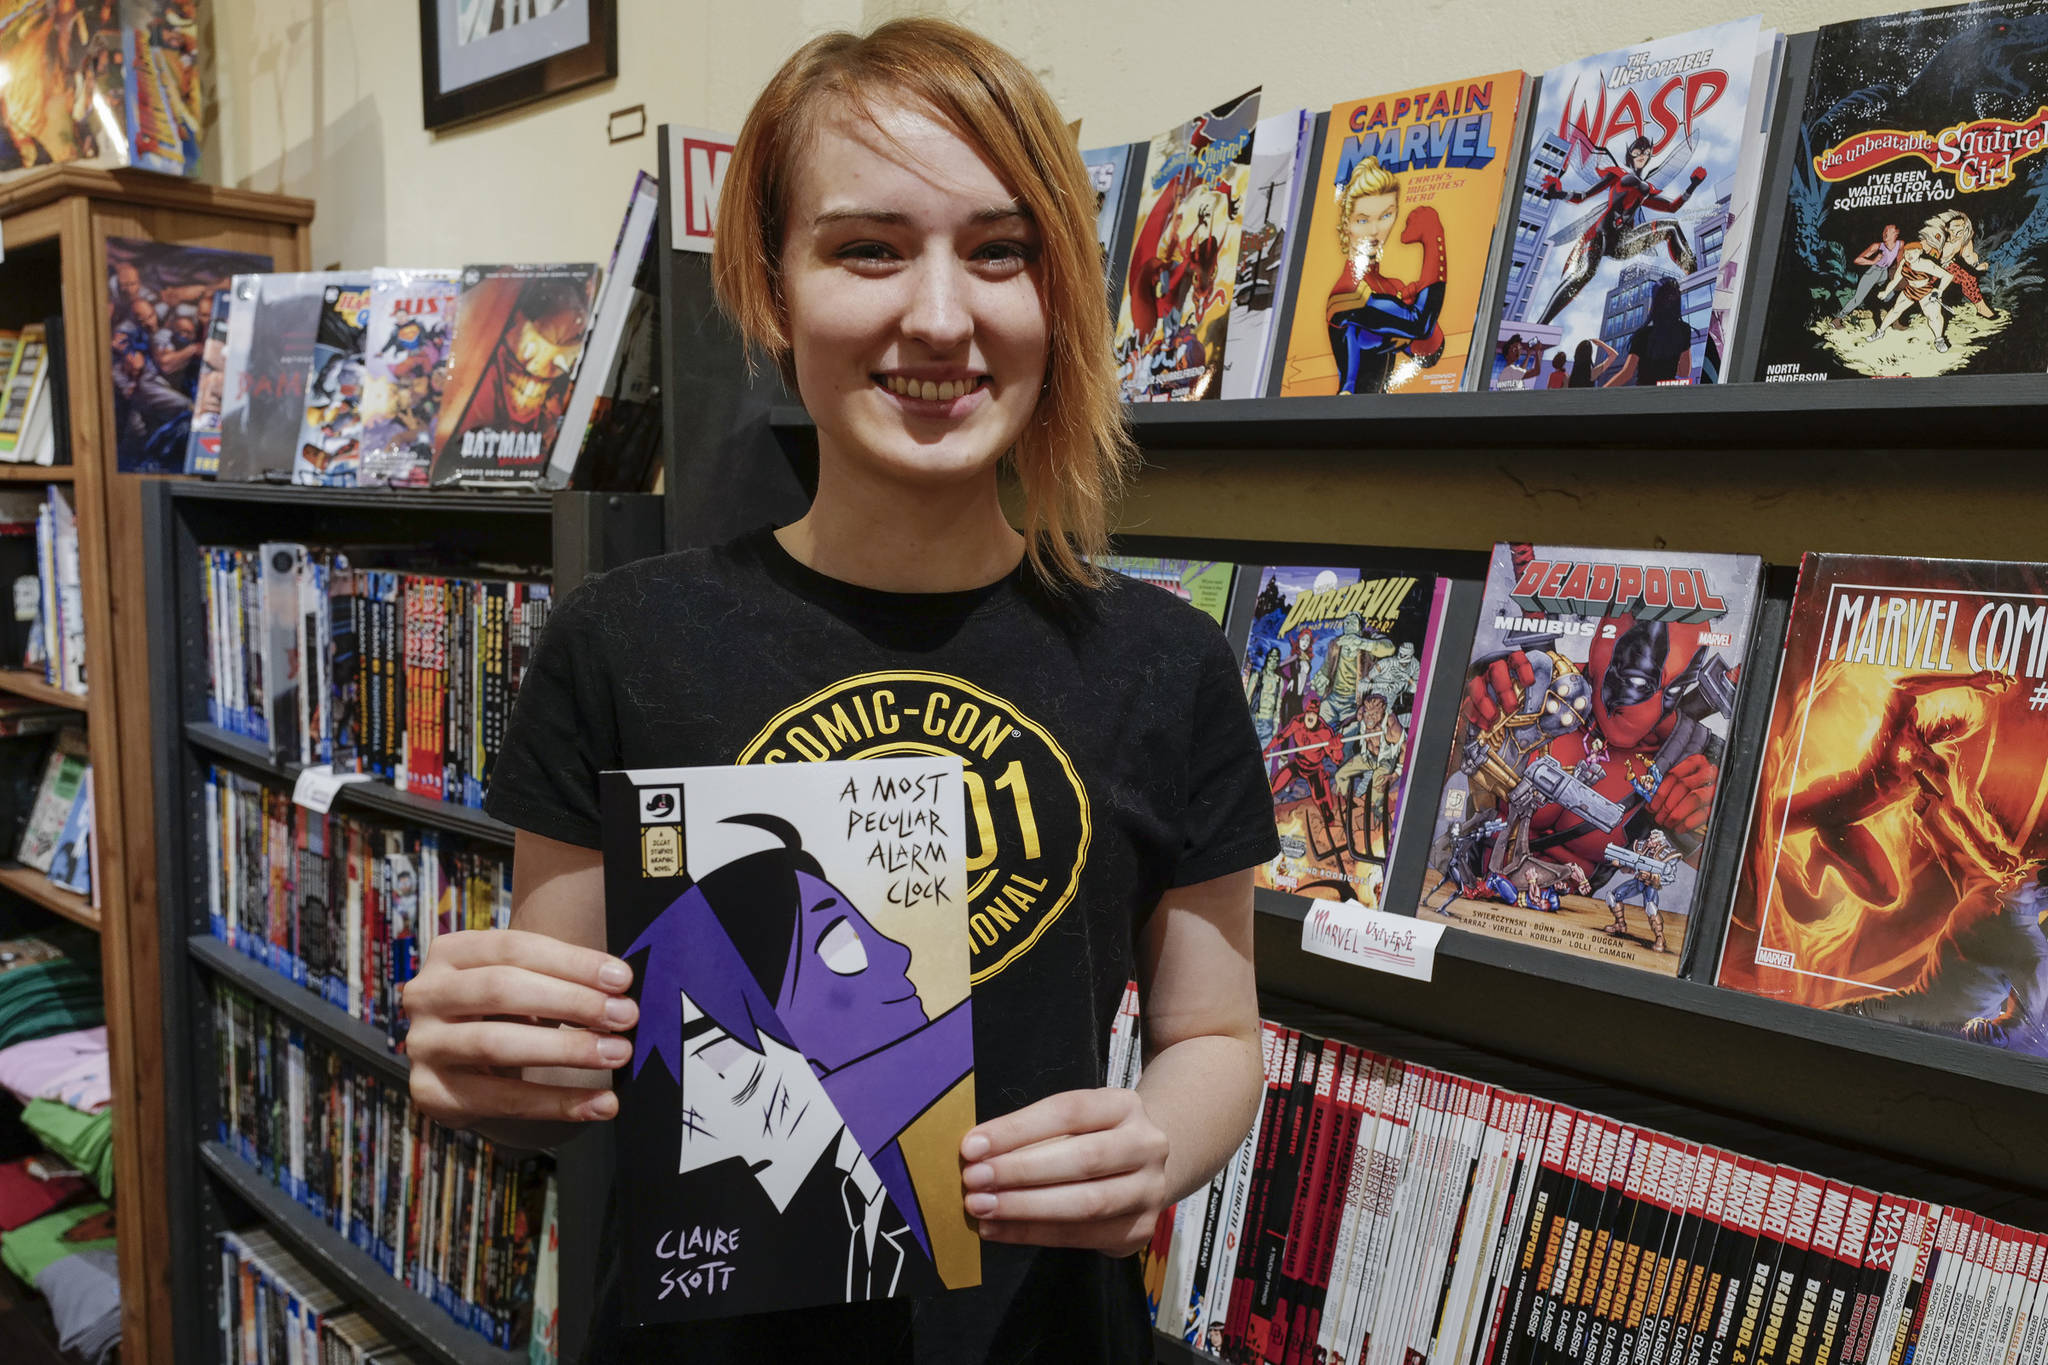 Claire Scott, 16, a junior at Juneau-Douglas High School: Yadaa.at Kalé, shows off her second published comic book, A Most Peculiar Alarm Clock, at Alaska Robotics Gallery on Tuesday, Nov. 12, 2019. Scott’s first book, Meow Cats United, was published last year. (Michael Penn | Juneau Empire)